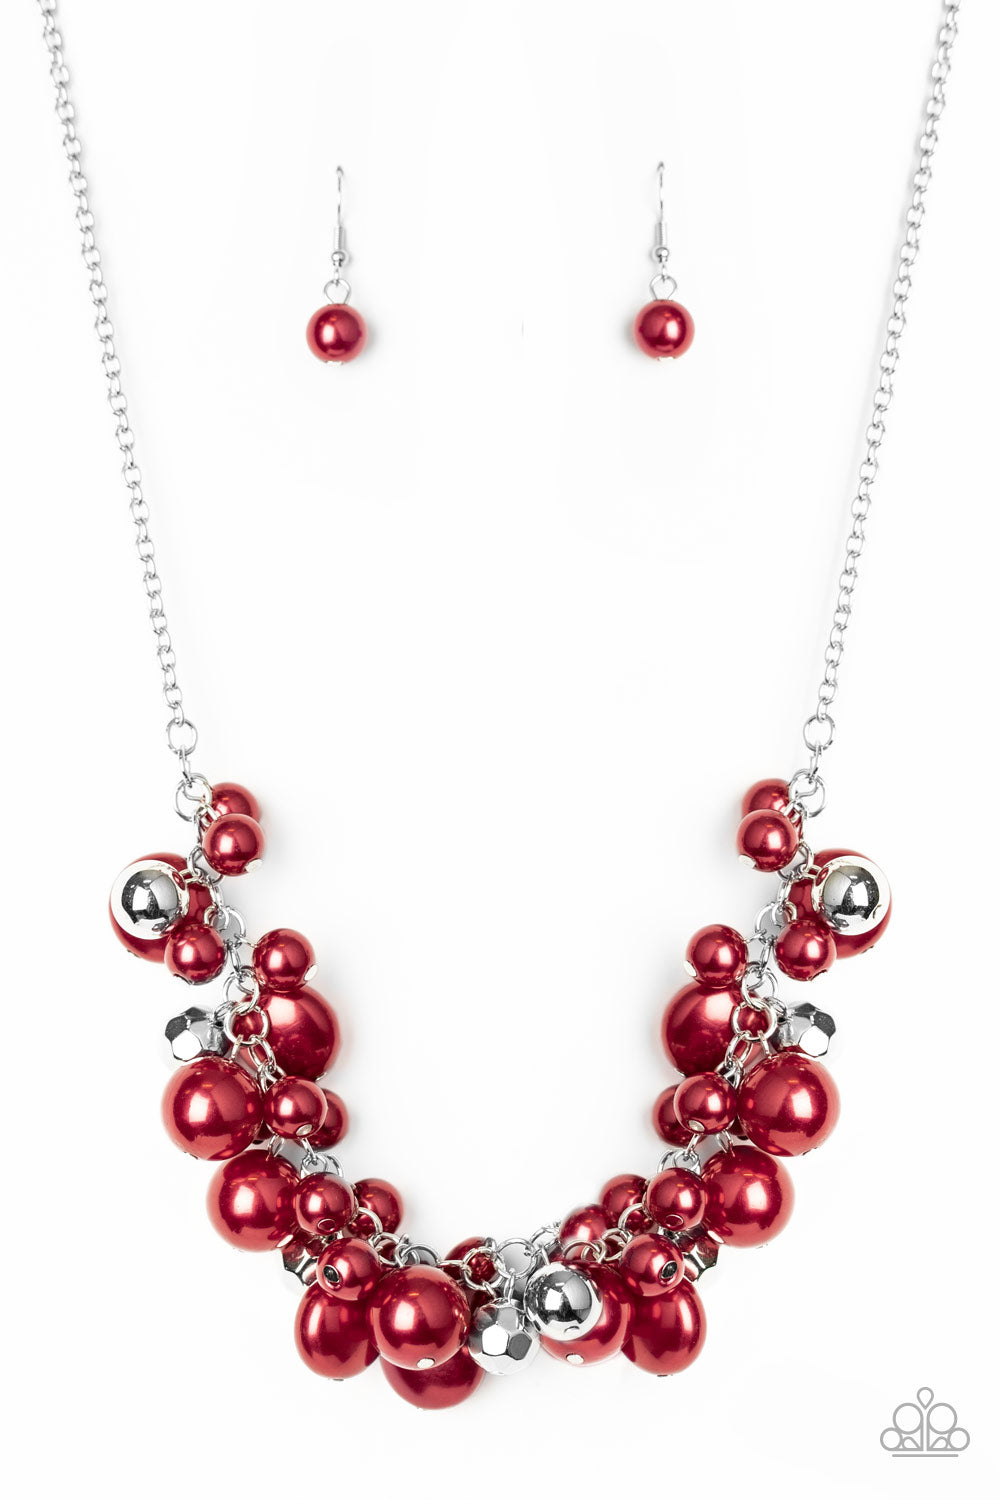 Battle of the Bombshells - Red - VJ Bedazzled Jewelry